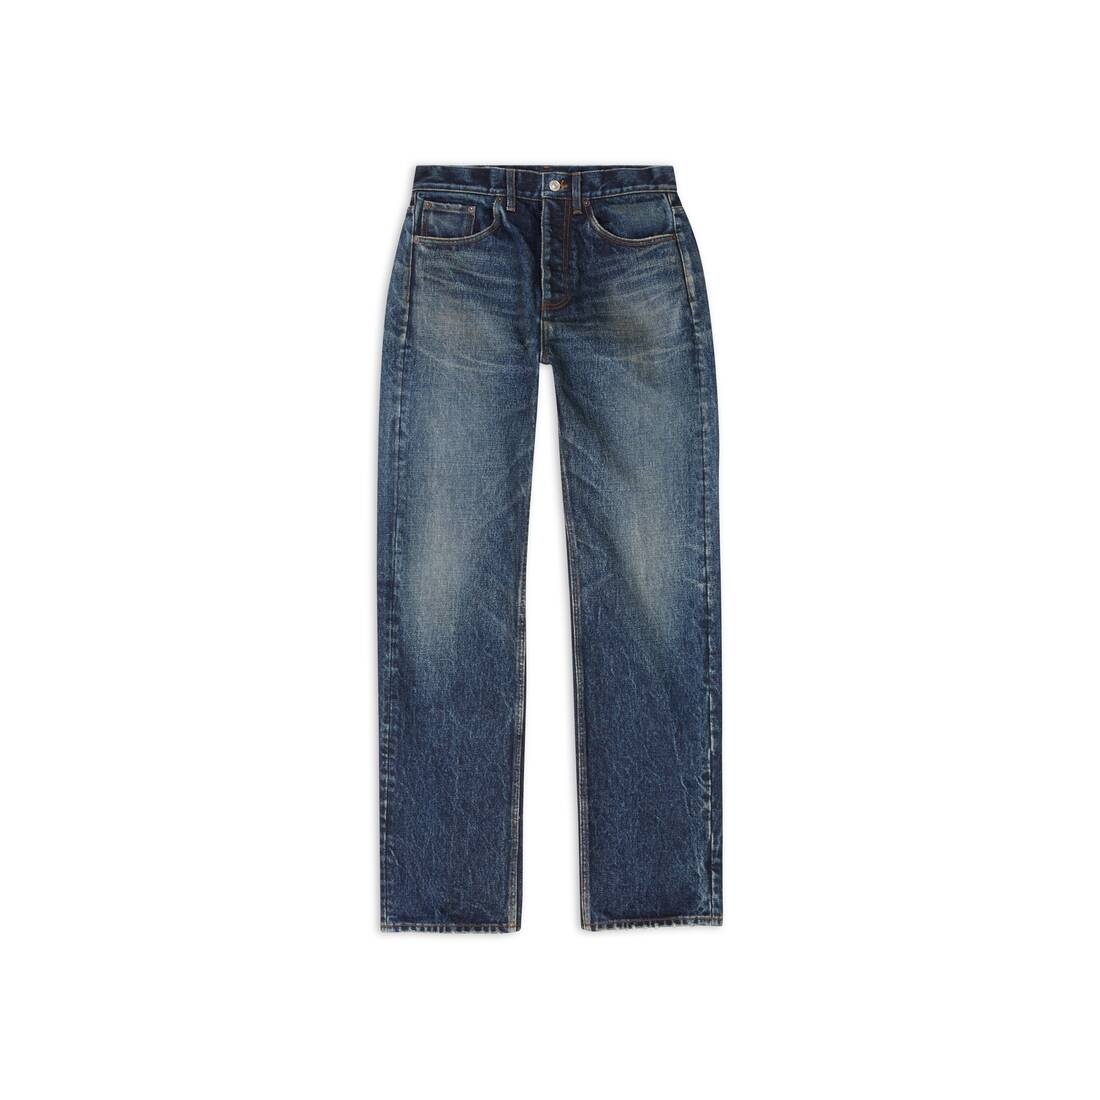 Men's Relaxed Jeans in Navy Blue - 1